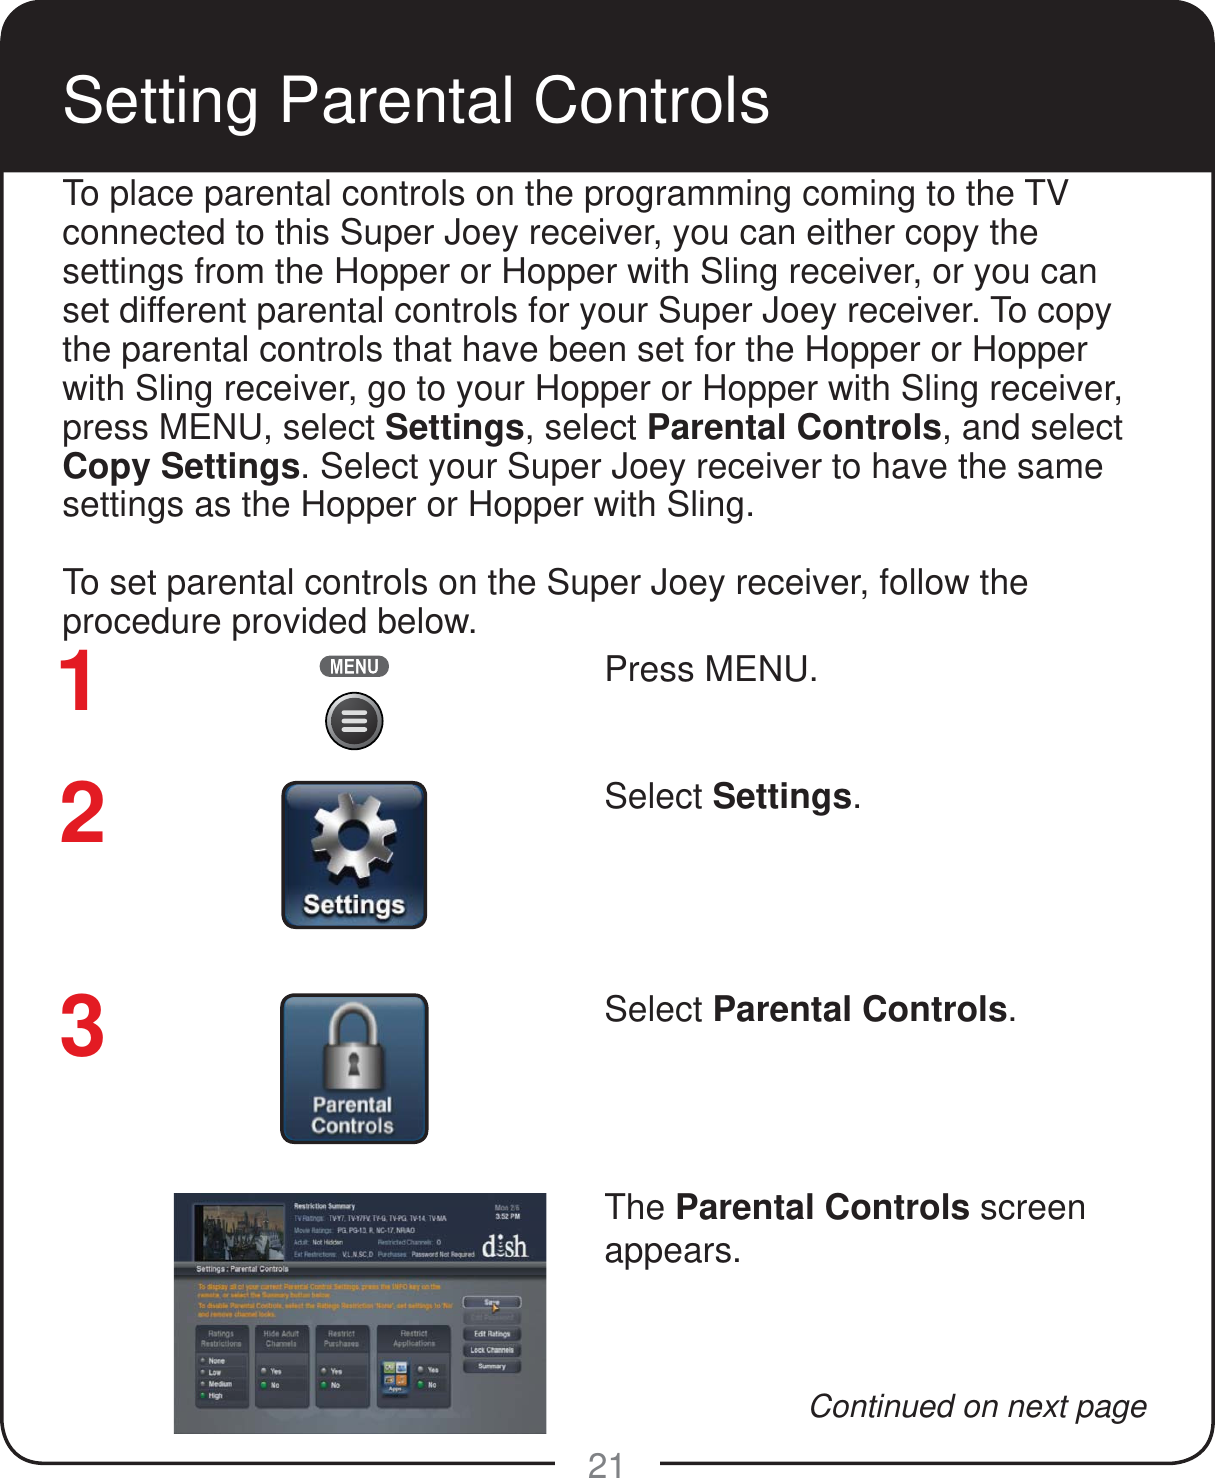 21Setting Parental ControlsPress MENU.Select Settings.Select Parental Controls. The Parental Controls screen appears.To place parental controls on the programming coming to the TV connected to this Super Joey receiver, you can either copy the settings from the Hopper or Hopper with Sling receiver, or you can set different parental controls for your Super Joey receiver. To copy the parental controls that have been set for the Hopper or Hopper with Sling receiver, go to your Hopper or Hopper with Sling receiver, press MENU, select Settings, select Parental Controls, and select Copy Settings. Select your Super Joey receiver to have the same settings as the Hopper or Hopper with Sling.To set parental controls on the Super Joey receiver, follow the procedure provided below. 123Continued on next page